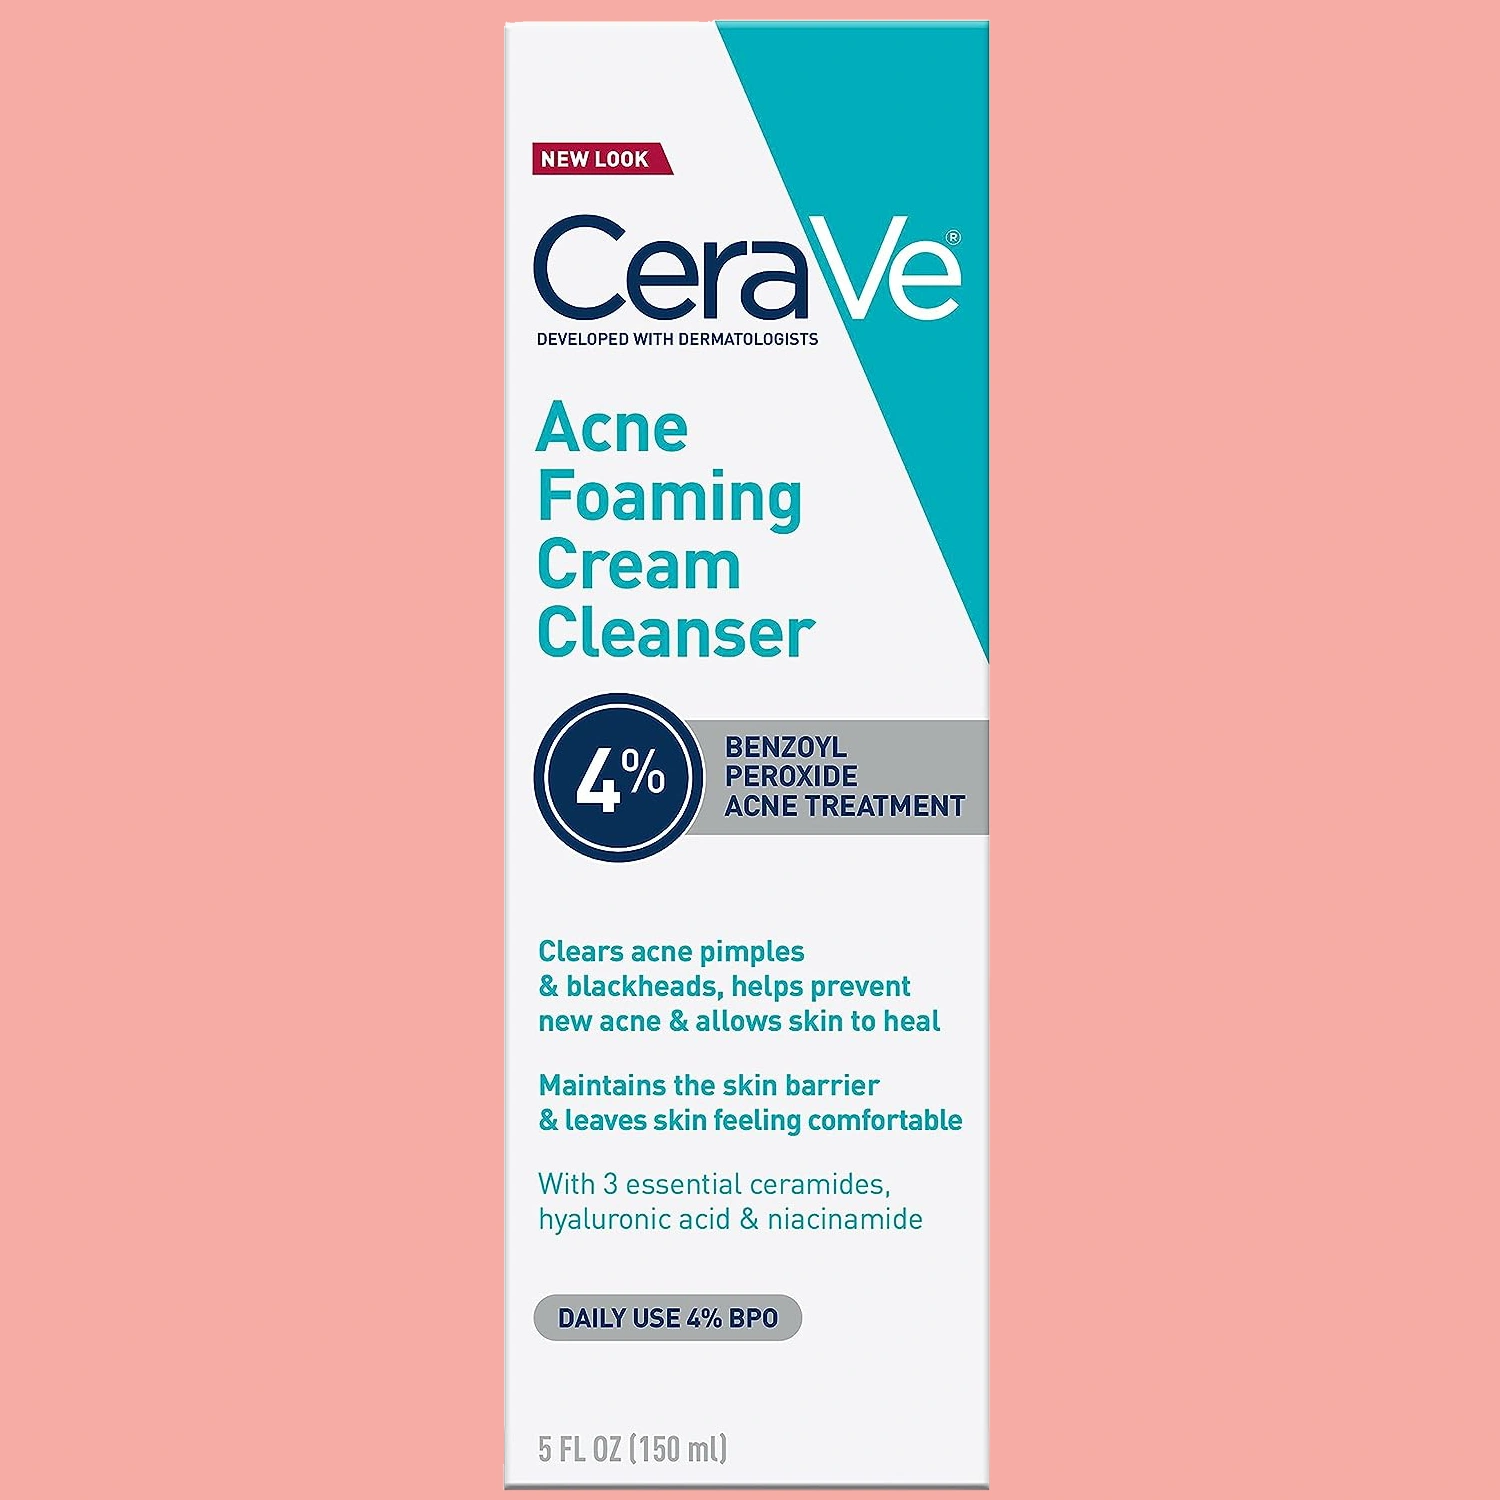 A bottle of CeraVe Acne Foaming Cream Cleanser on a pink background